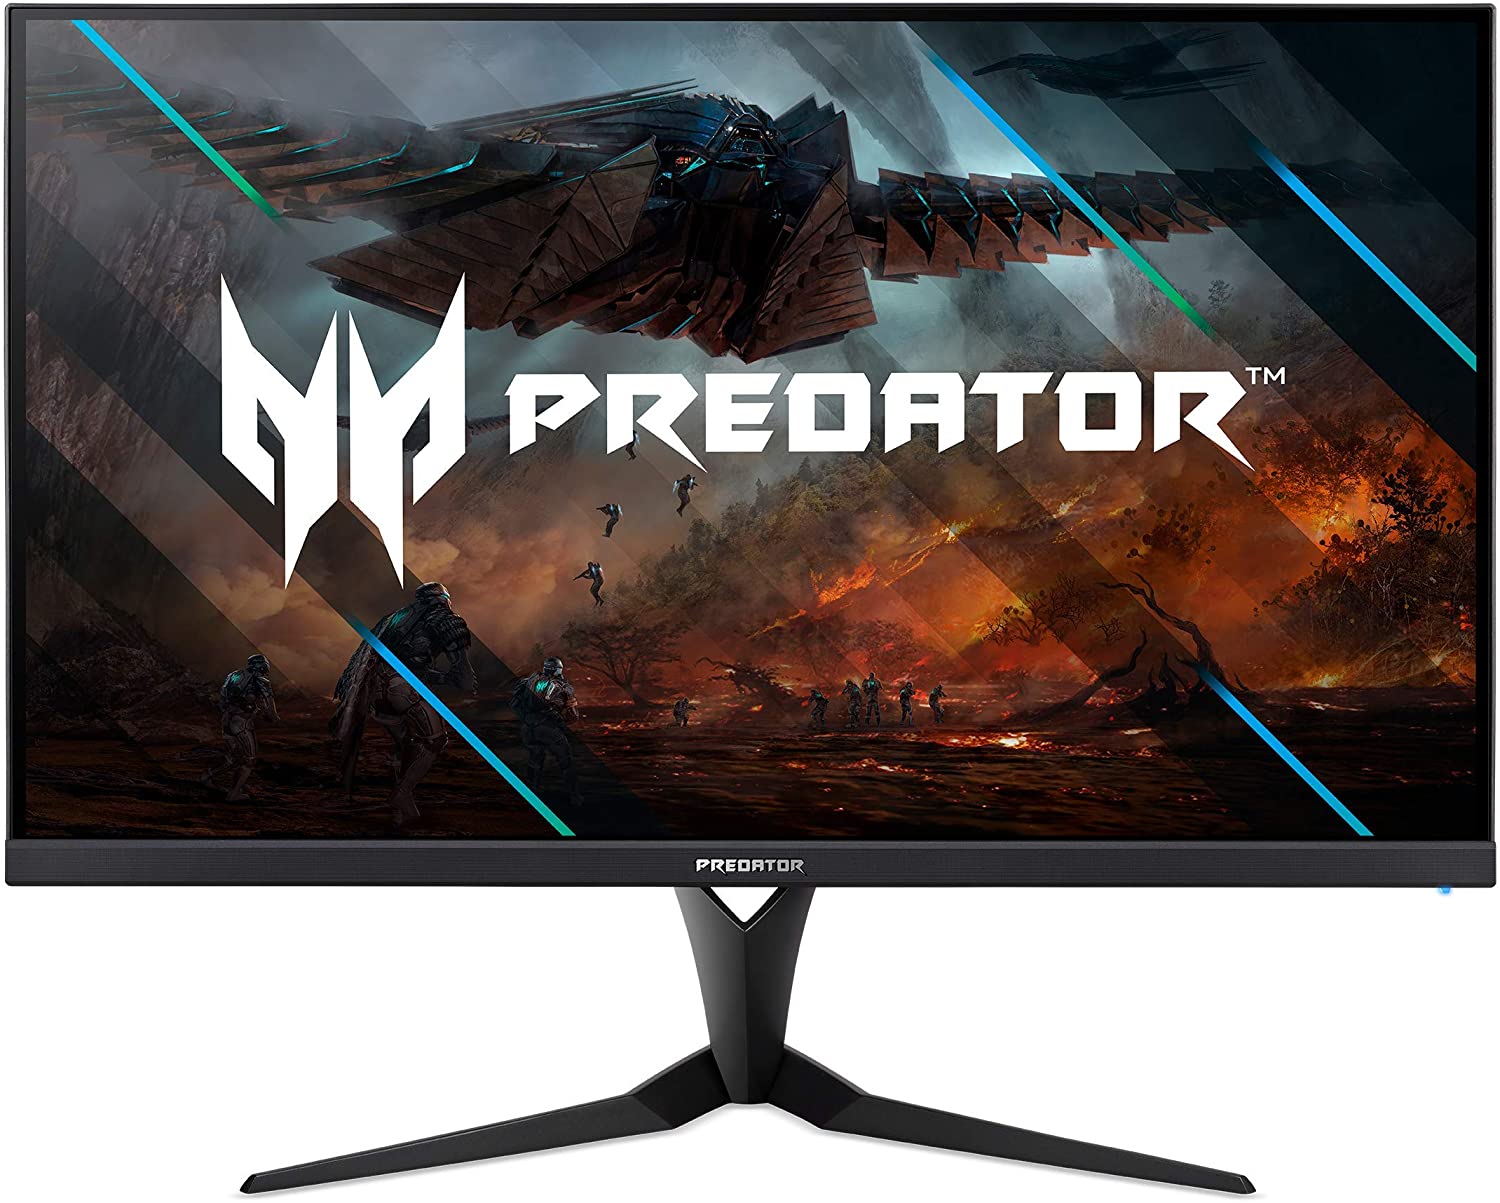 32" Acer Predator XB323U GPbmiiphzx HDR 600 2560x1440 170Hz iPS NVIDIA G-SYNC Compatible Gaming Monitor $550 + free s/h at Amazon